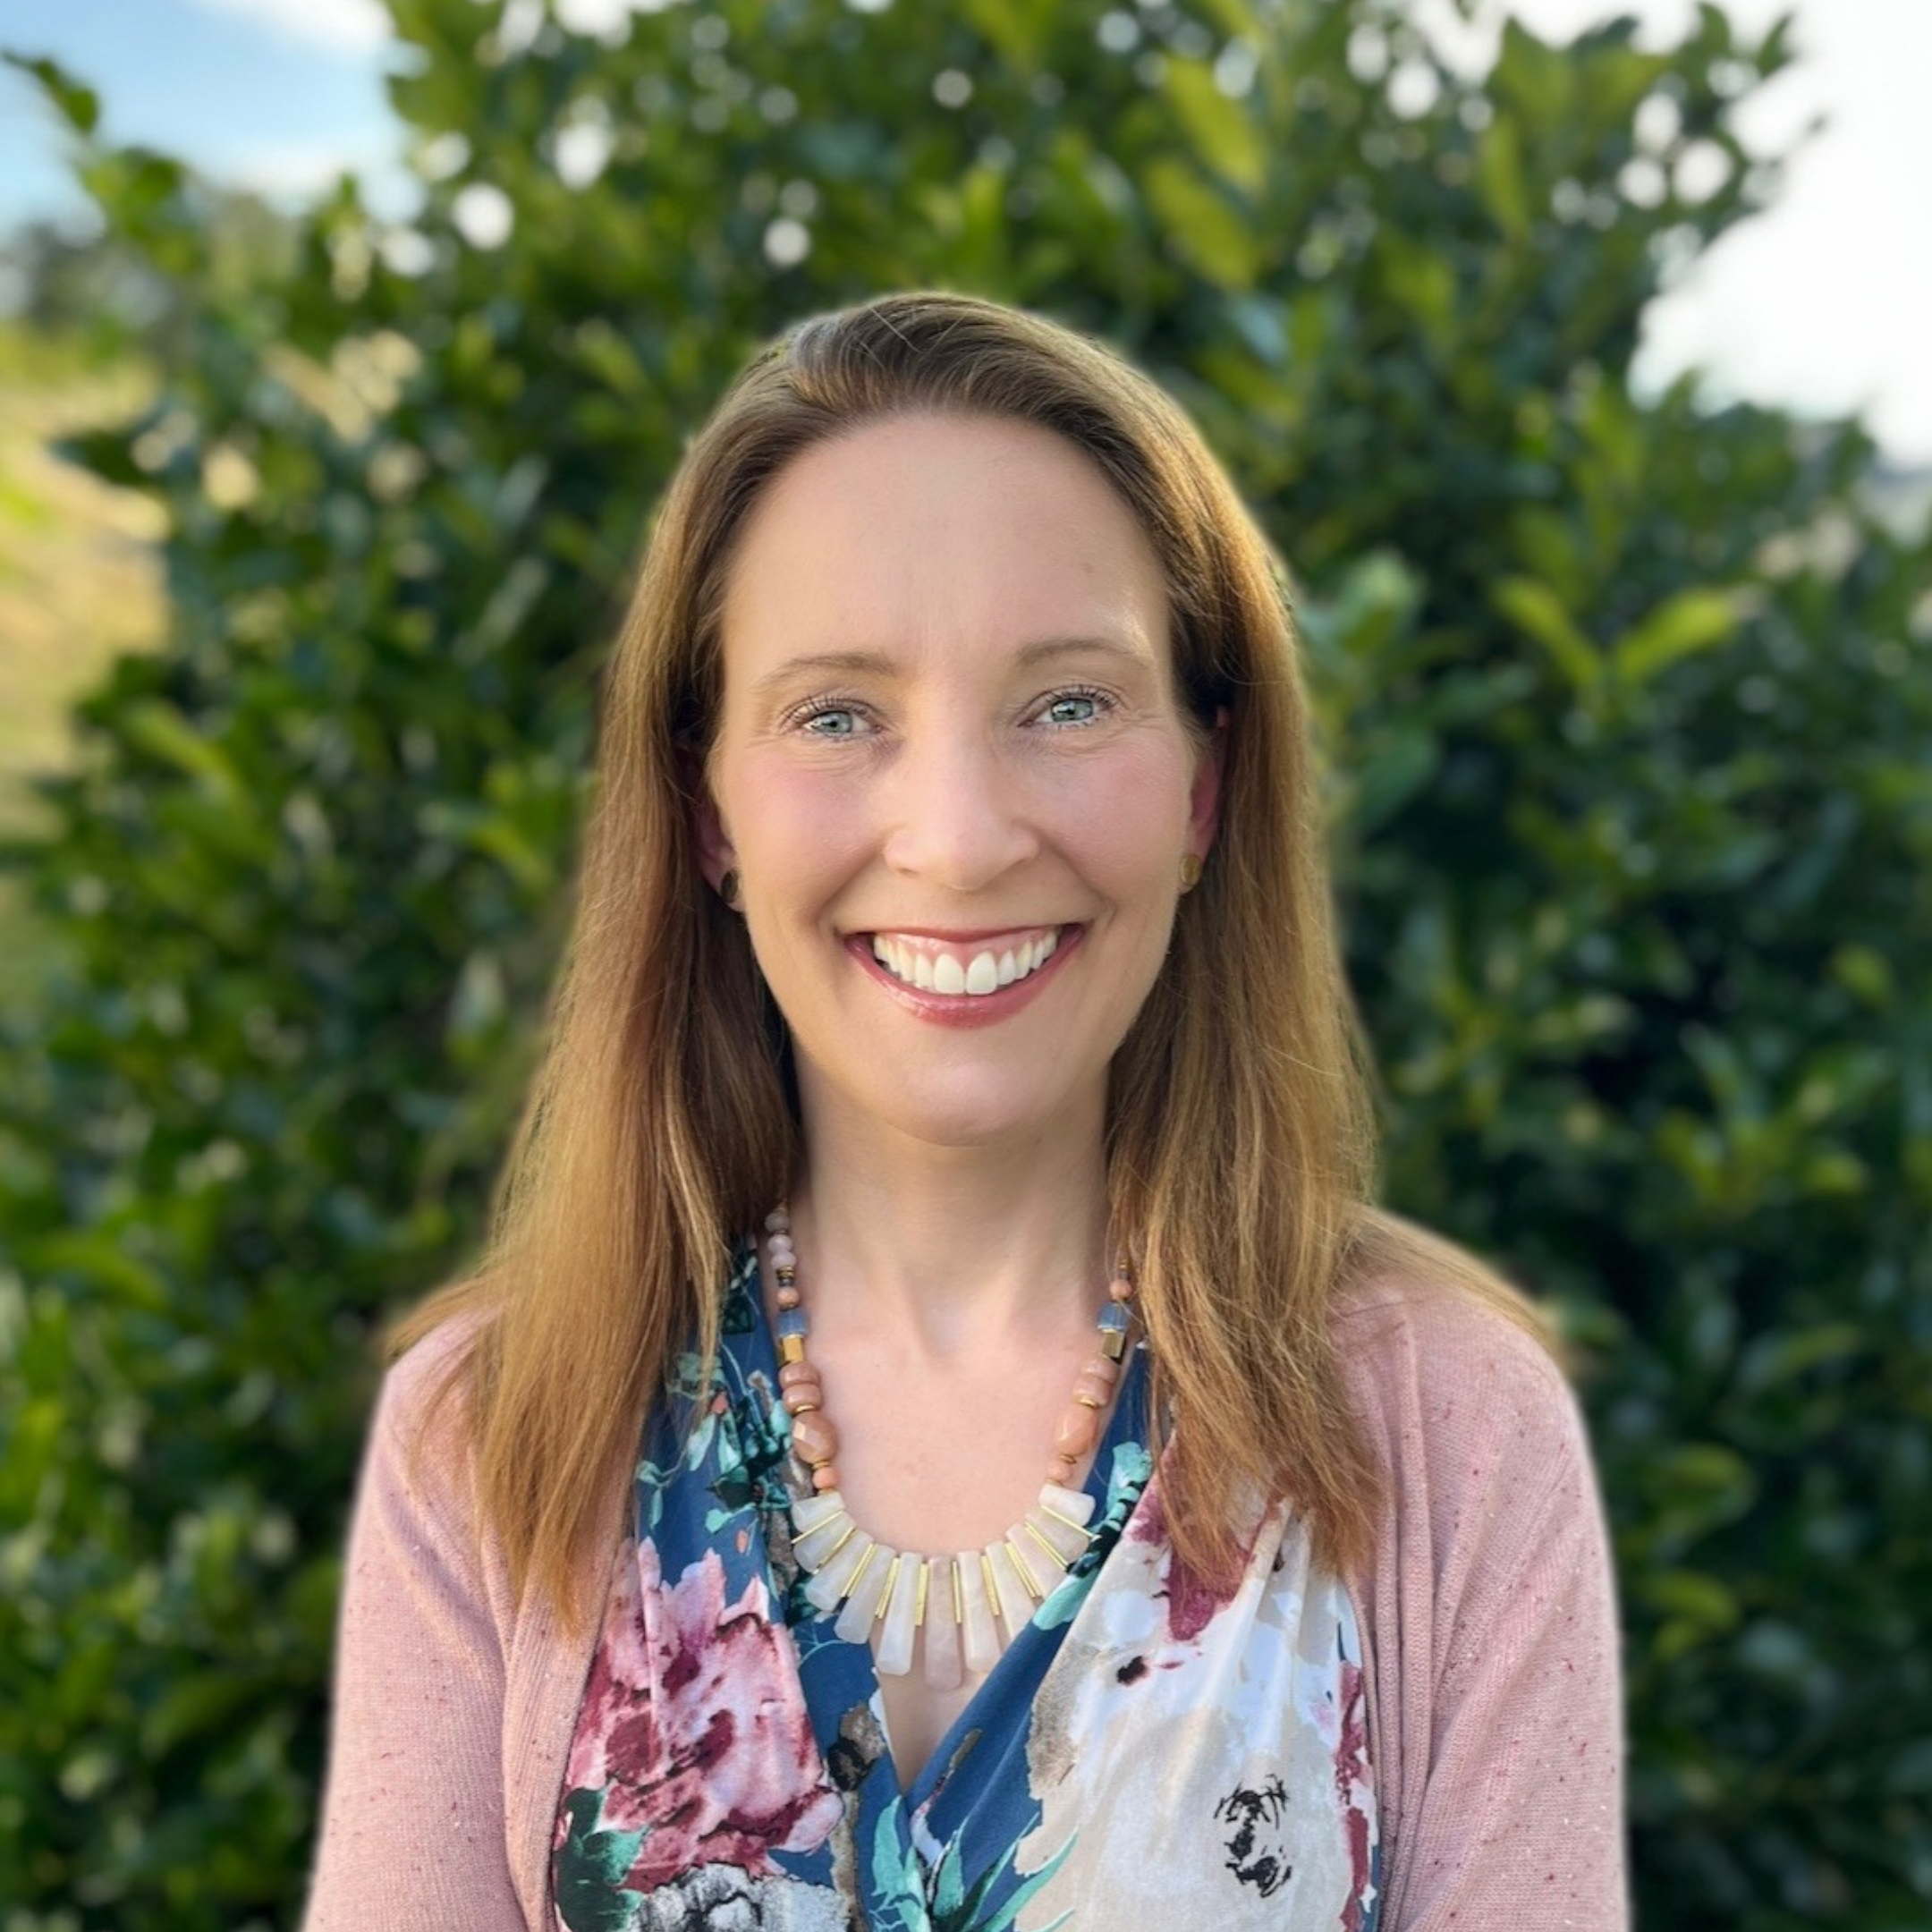 Elizabeth Morgan (Kaczor), PA-C, is a Psychiatric Physician Assistant at Advaita Integrated Medicine in Raleigh, North Carolina, which is part of the Advaita Collective.